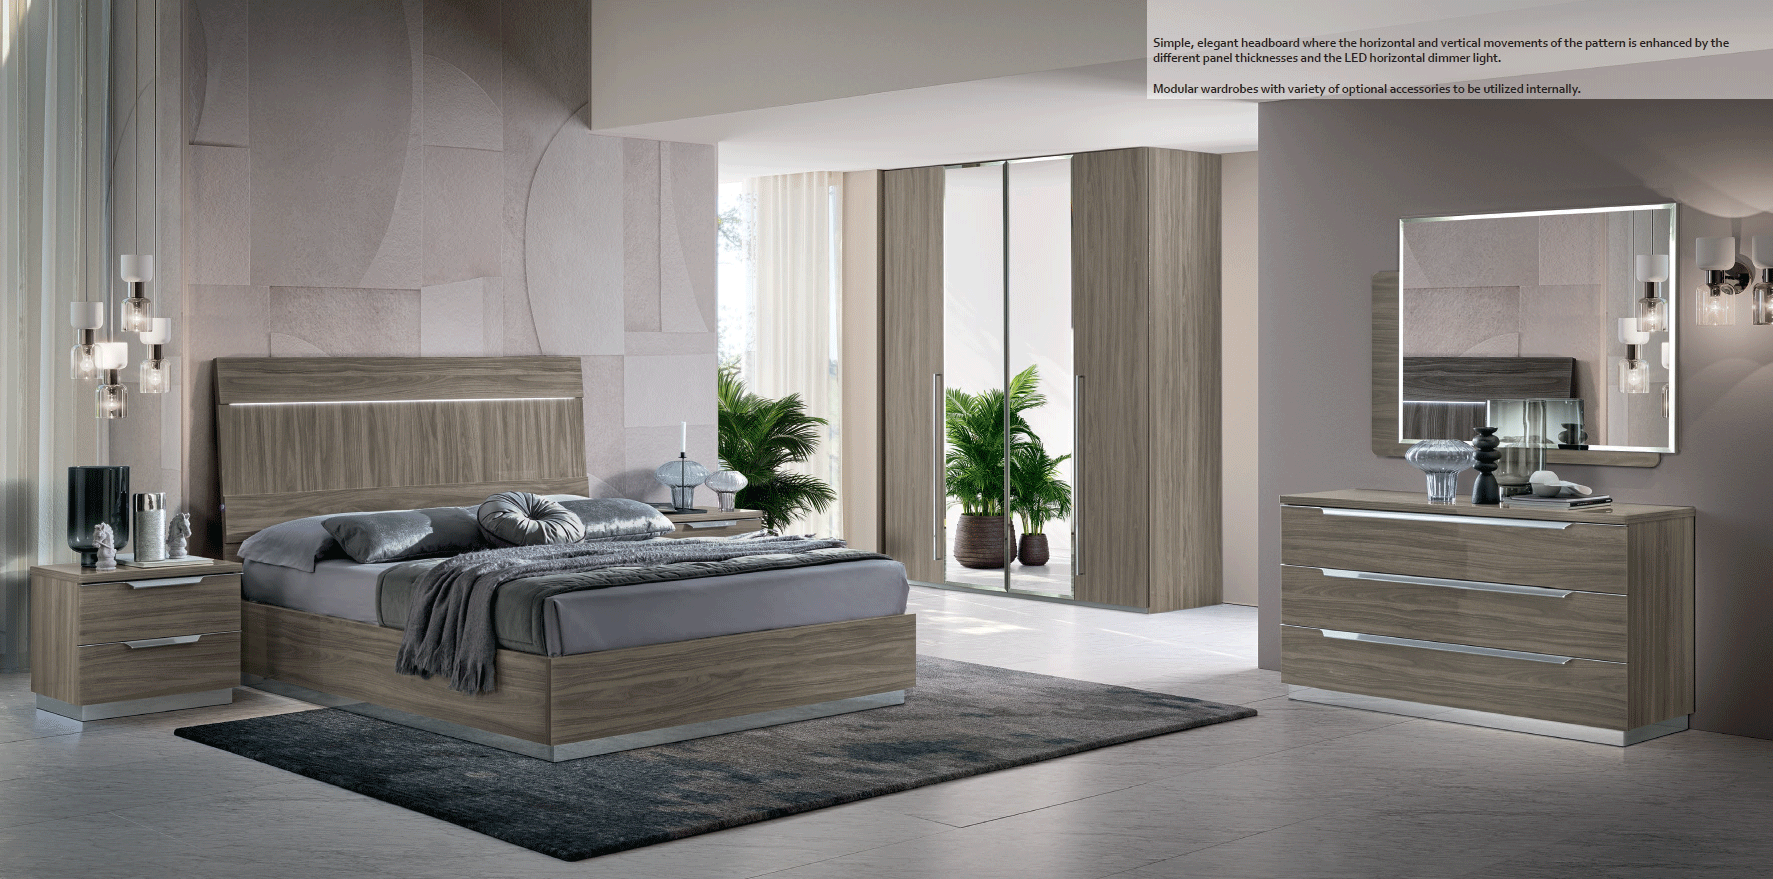 Bedroom Furniture Classic Bedrooms QS and KS Kroma Bedroom GREY Additional Items